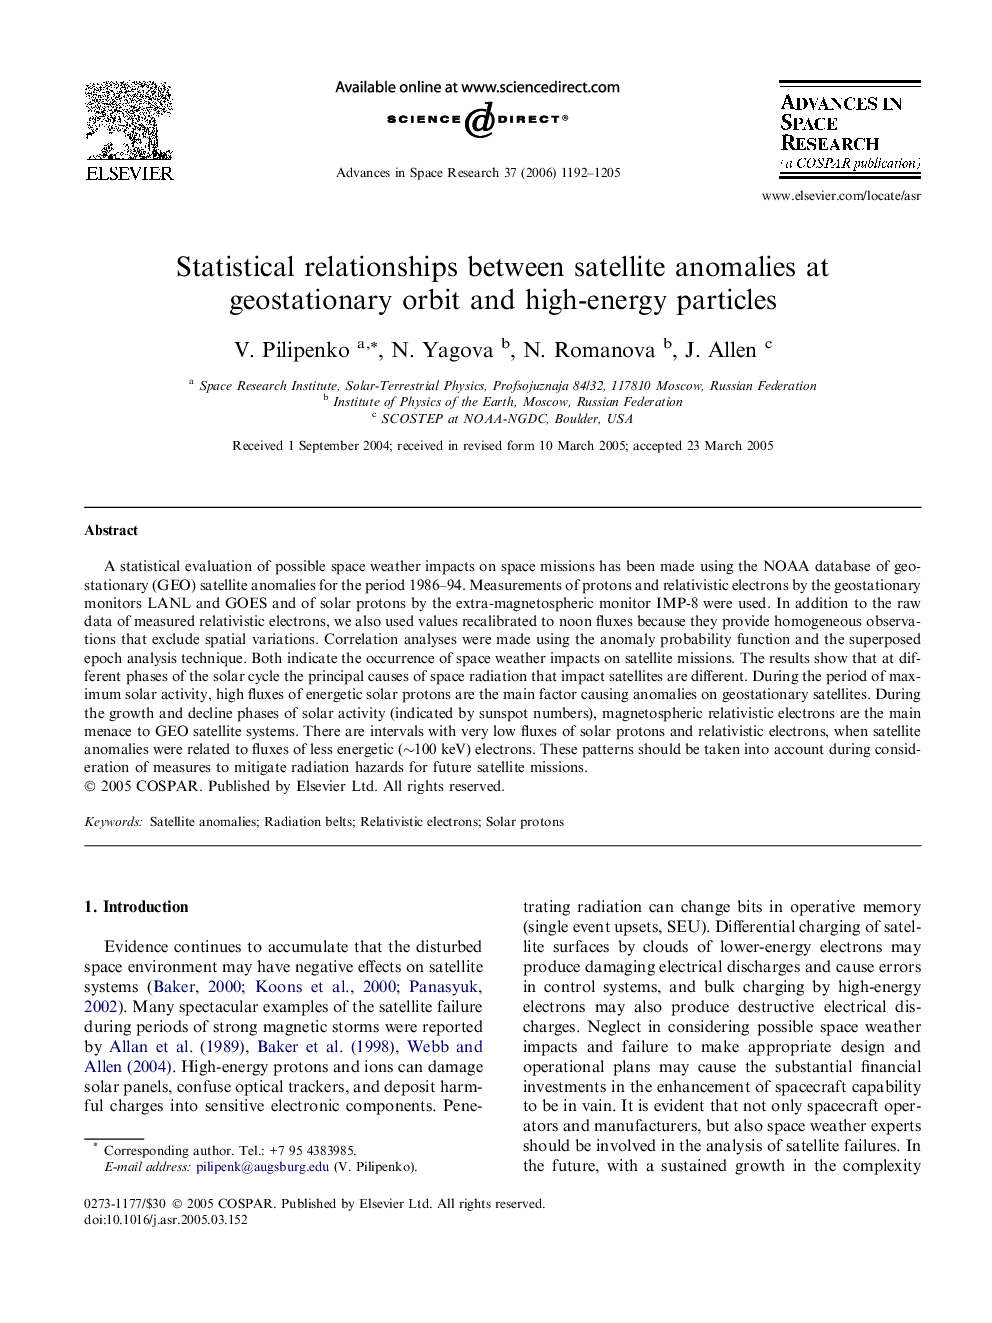 Statistical relationships between satellite anomalies at geostationary orbit and high-energy particles